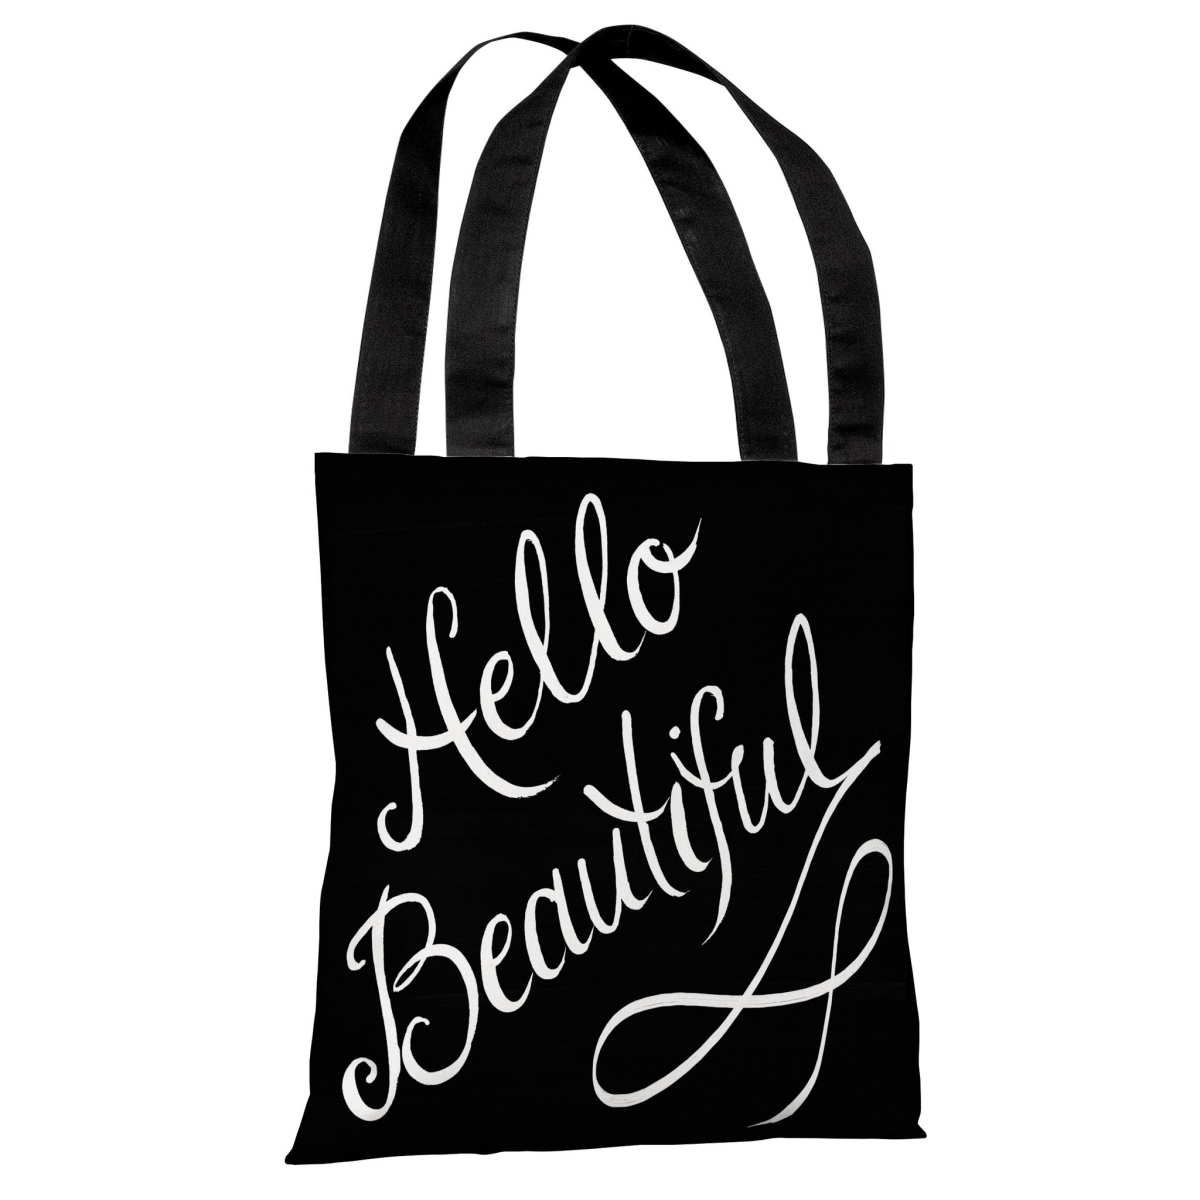 73054tt18p 18 In. Hello Beautiful & Stripes Polyester Tote Bag By Timree Gold - Black, White